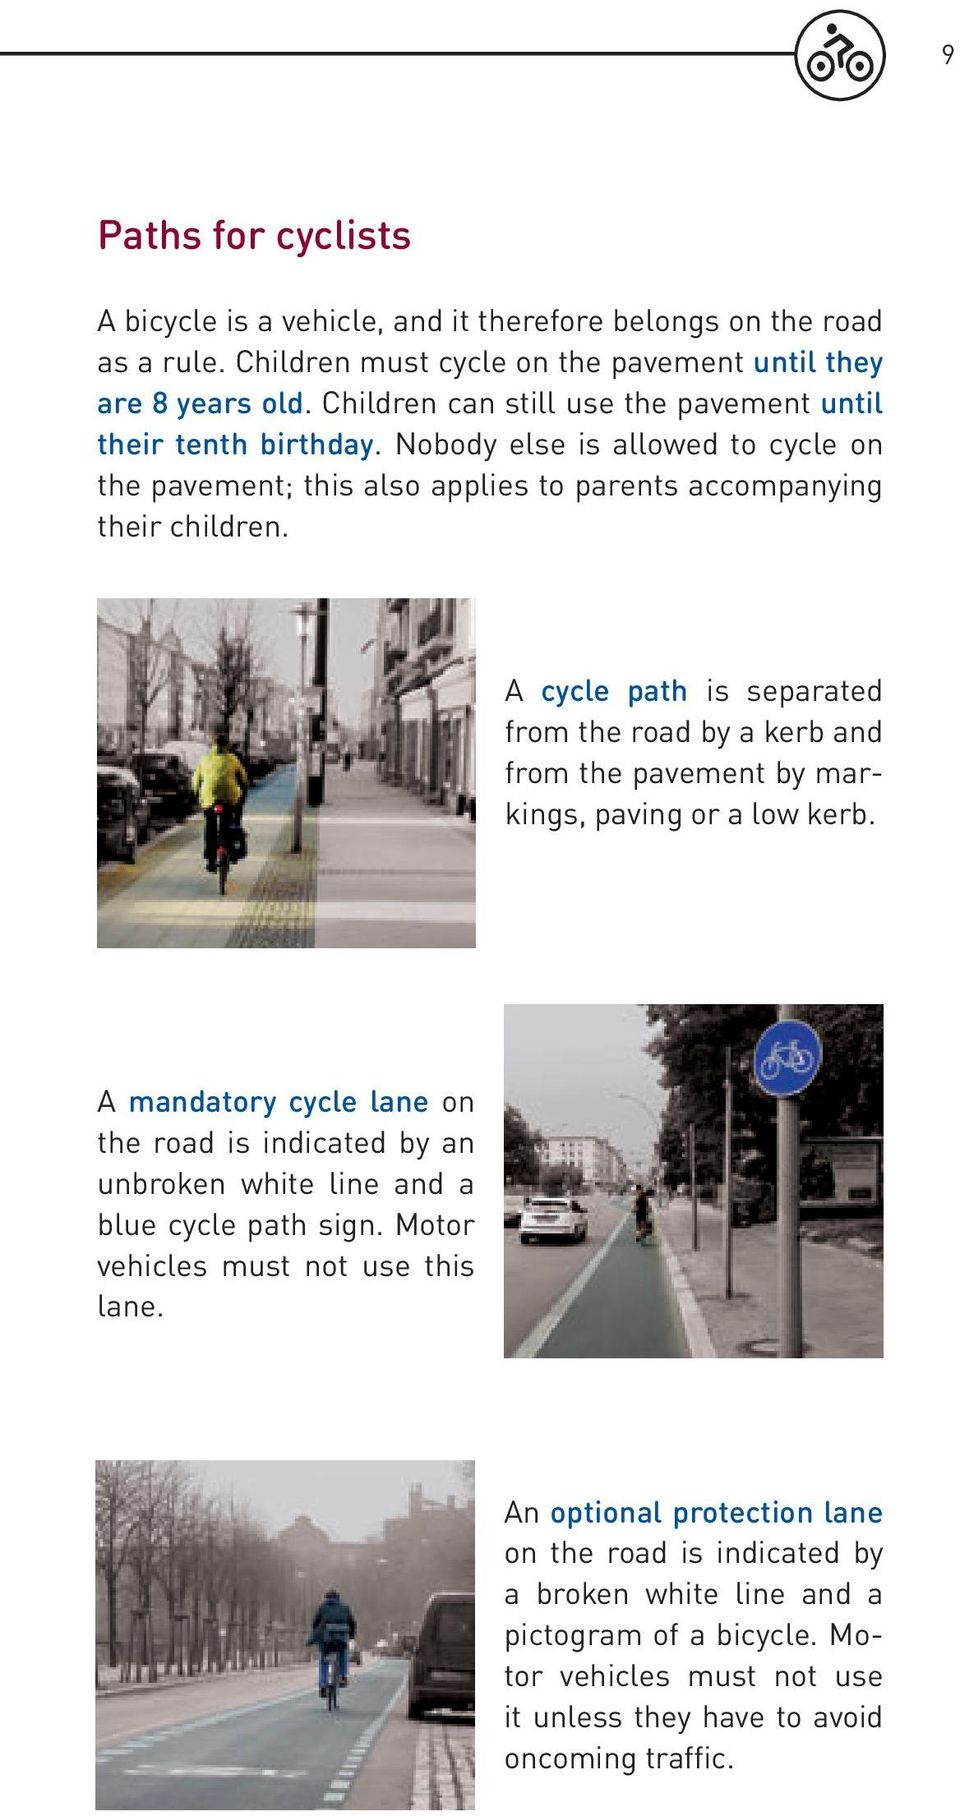 A cycle path is separated from the road by a kerb and from the pavement by markings, paving or a low kerb.